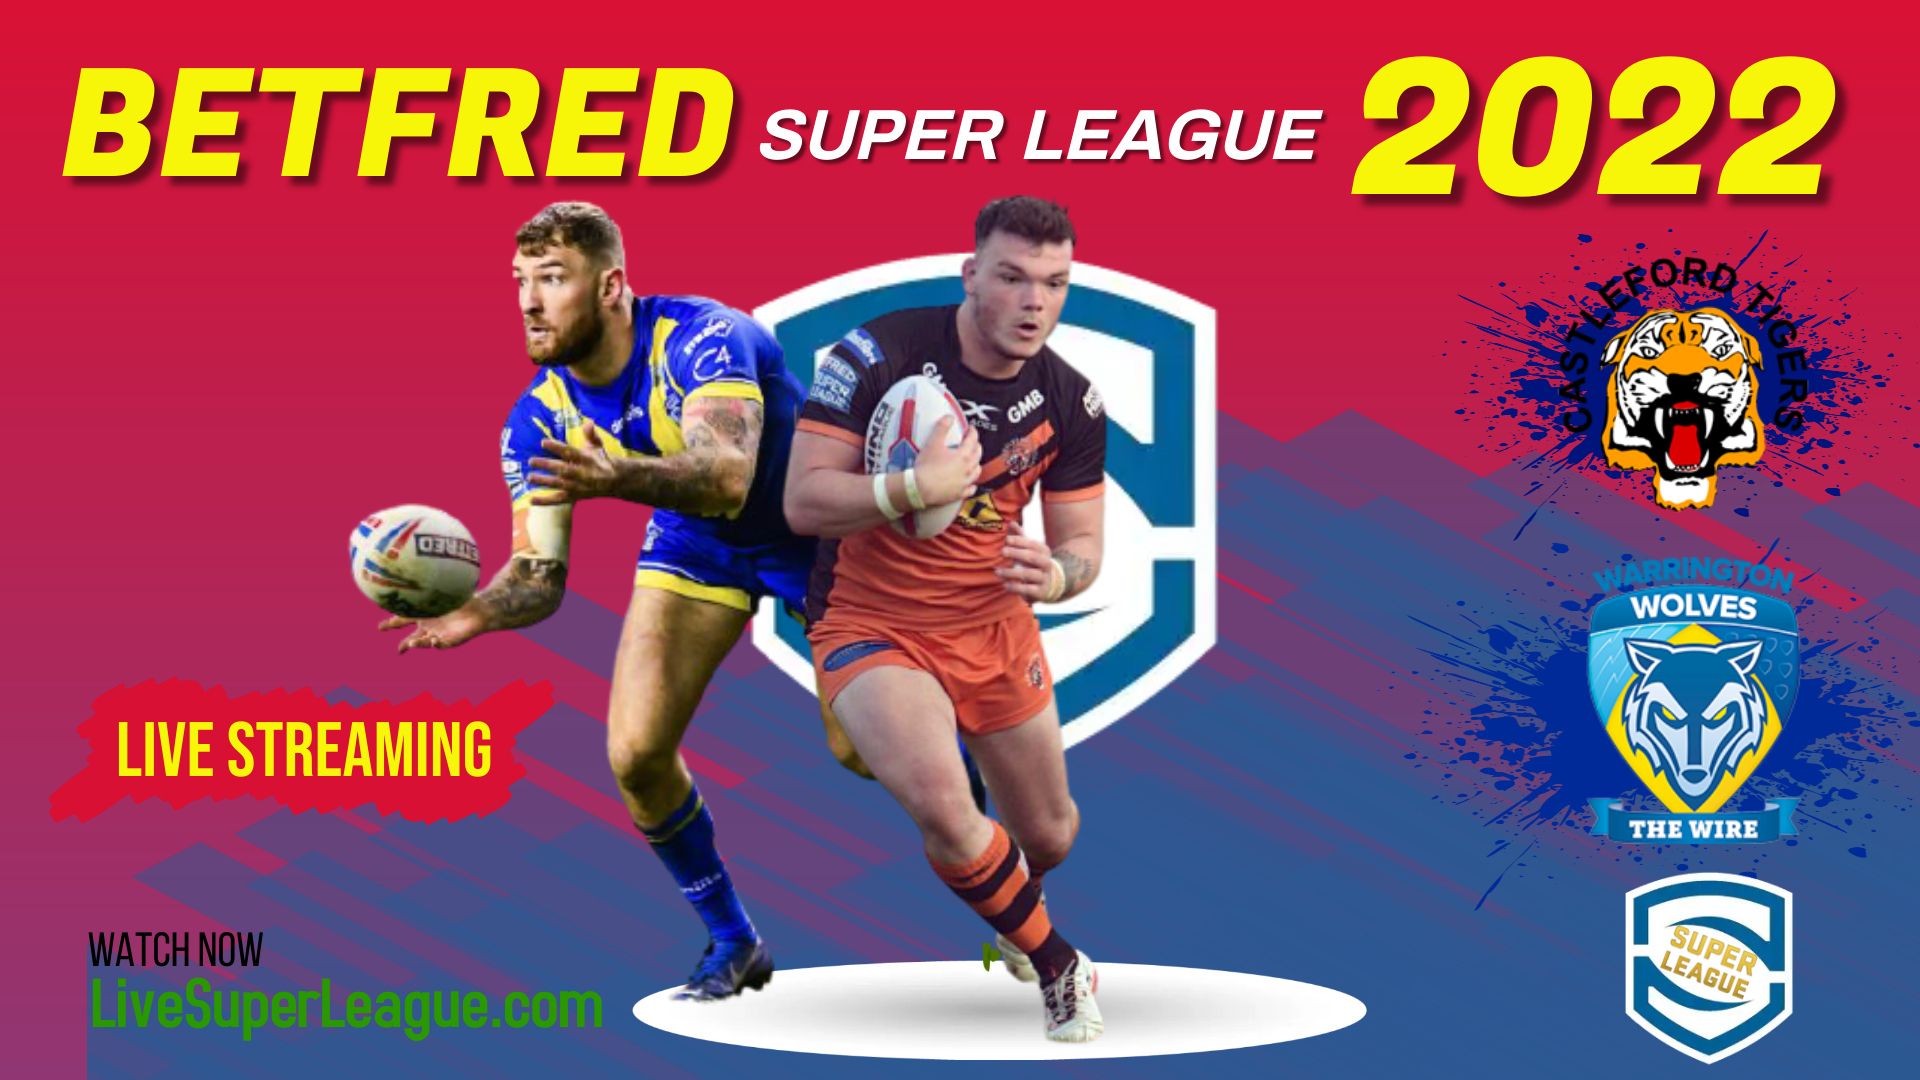 Warrington Wolves Vs Castleford Tigers RD 2 Live Stream 2022 | Full Match Replay